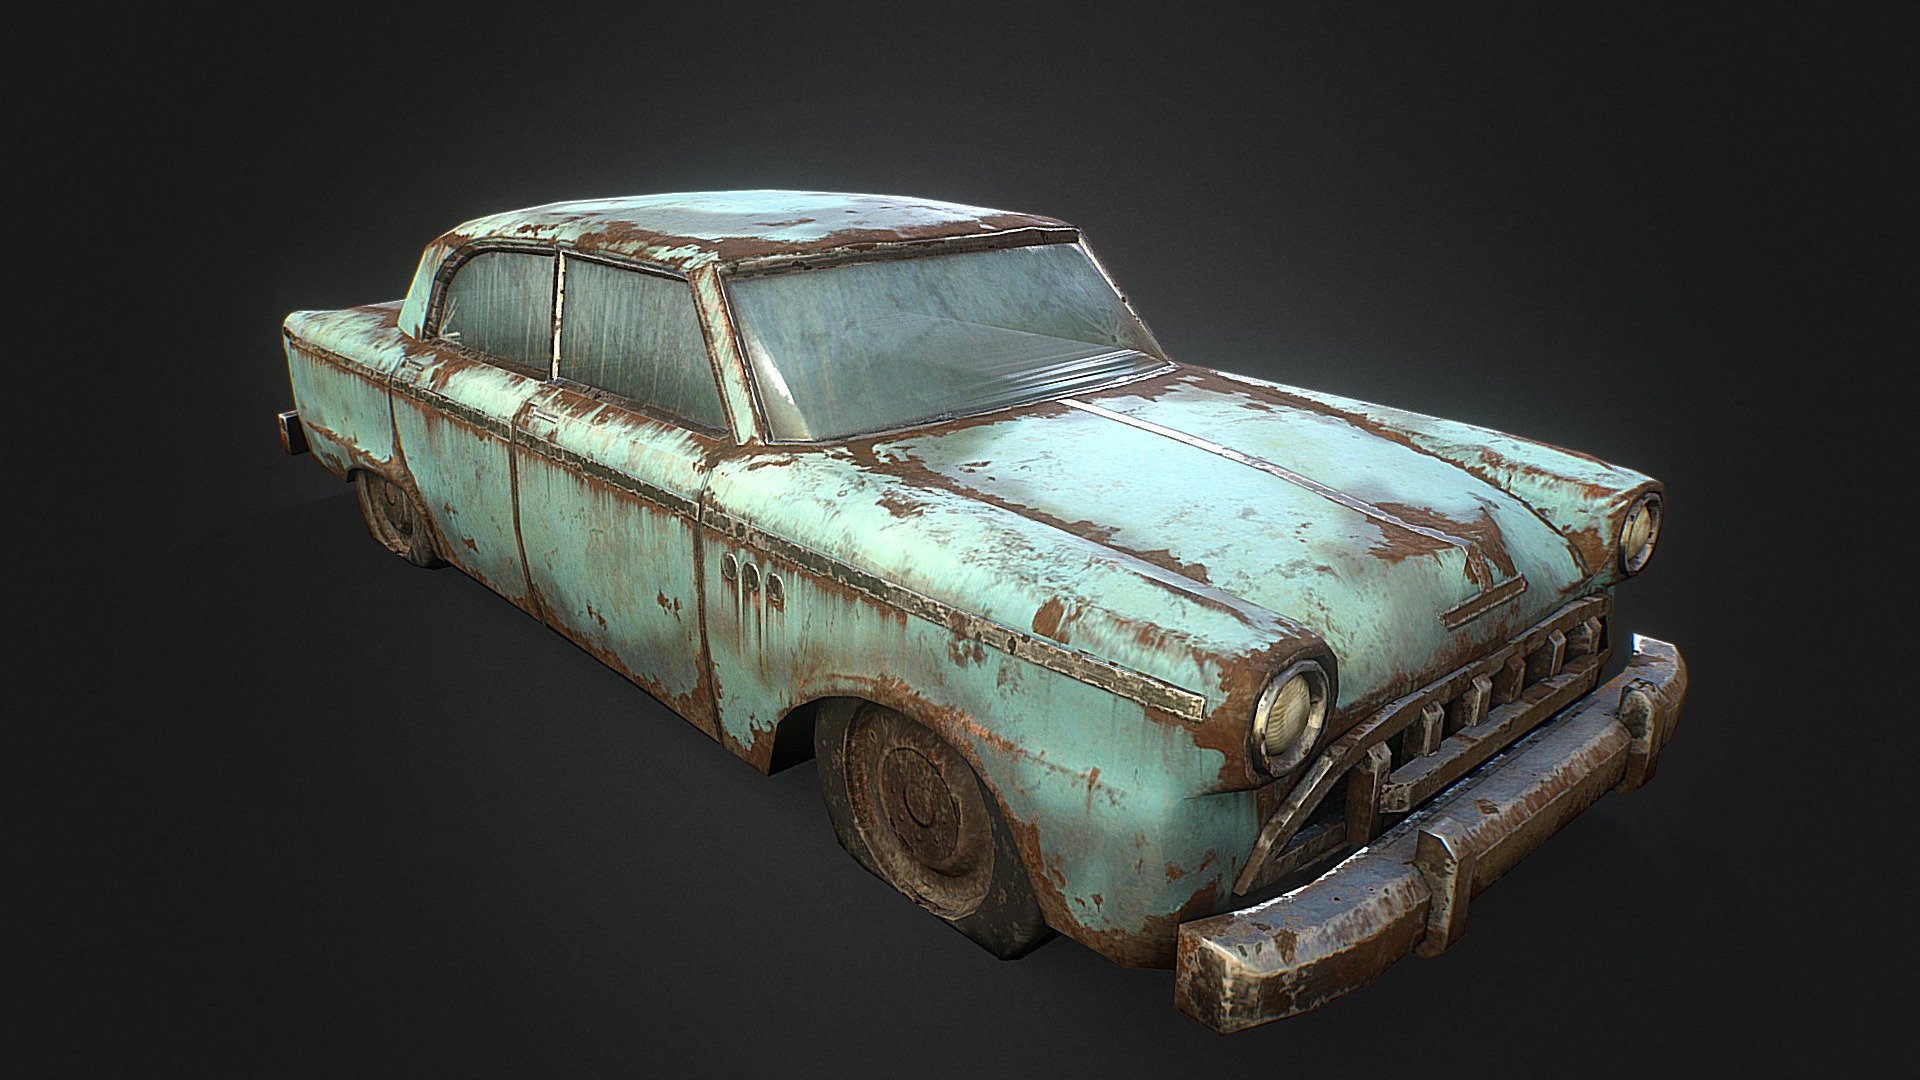 I have made a new version HERE , use this instead if you want a model with a higher texture resolution and poly count!

I always found the old cars you see sitting inside barns and on the sides of roads interesting, for them, the journey's over, and the world they knew has long since ended.

Modeled in 3DSMax 2015, textured in Substance Painter. Painting this was both really fun and a total pain =w= - Old Rusty Car - Download Free 3D model by Renafox (@kryik1023) 3d model